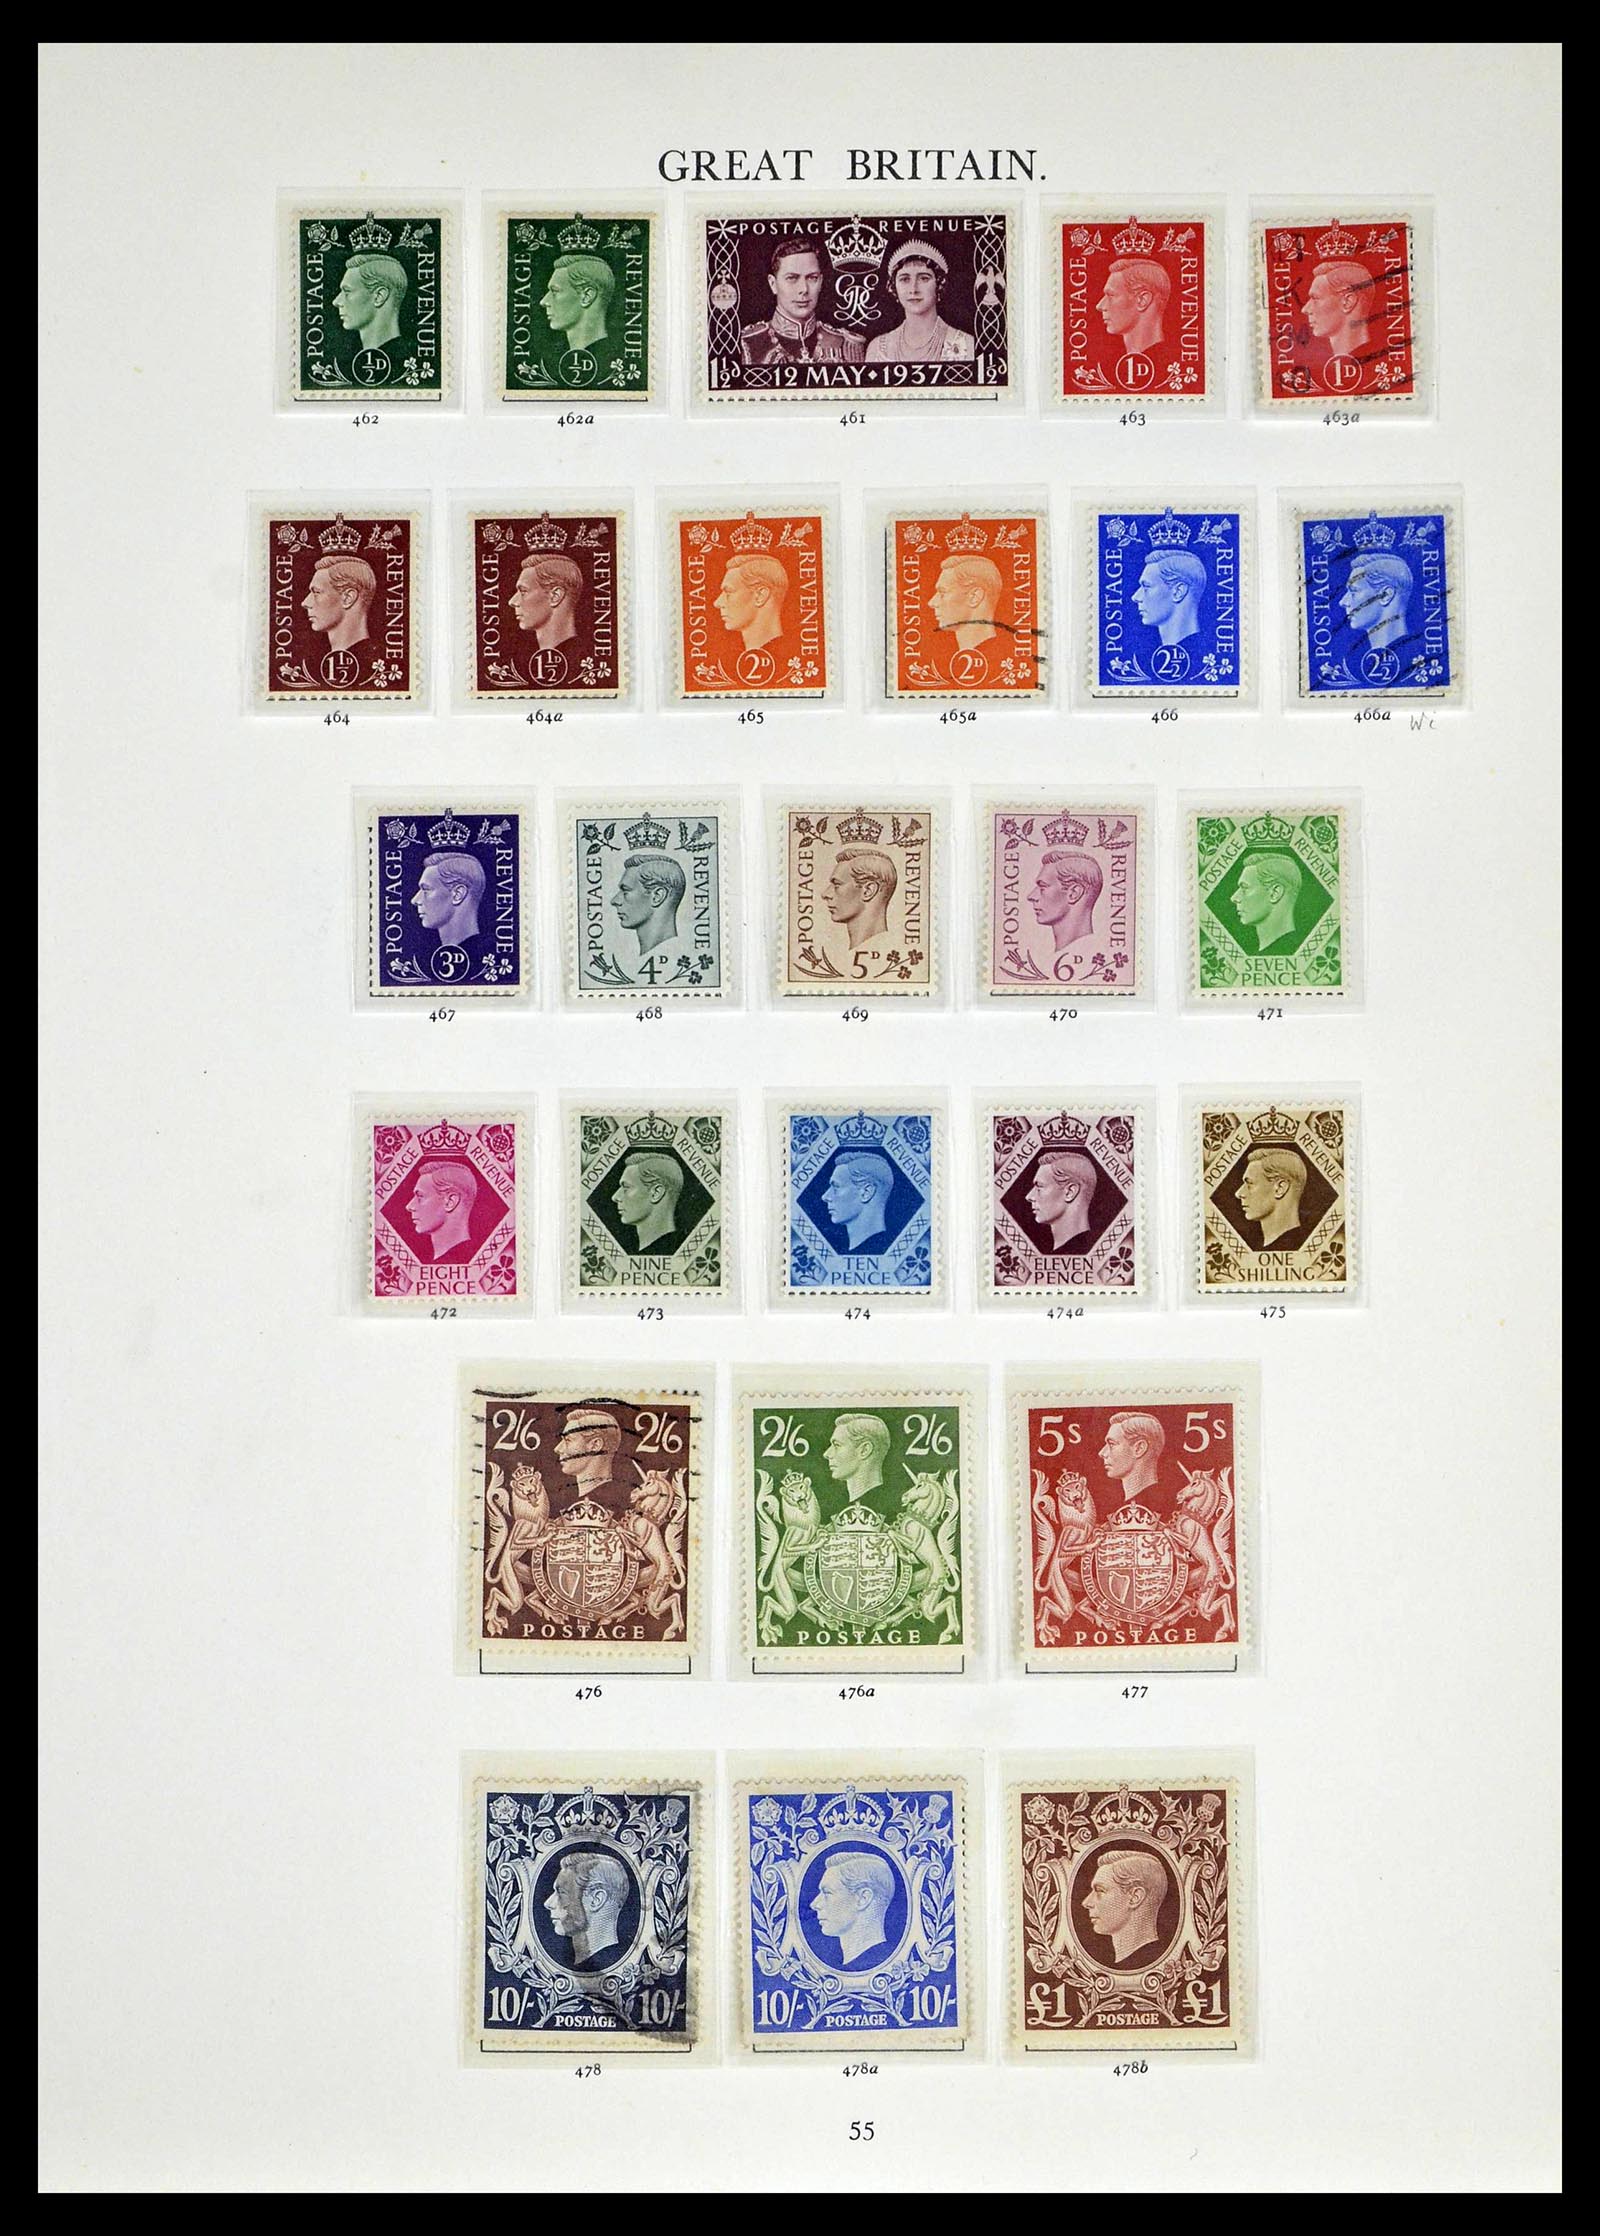 39025 0024 - Stamp collection 39025 Great Britain specialised 1840-1990.